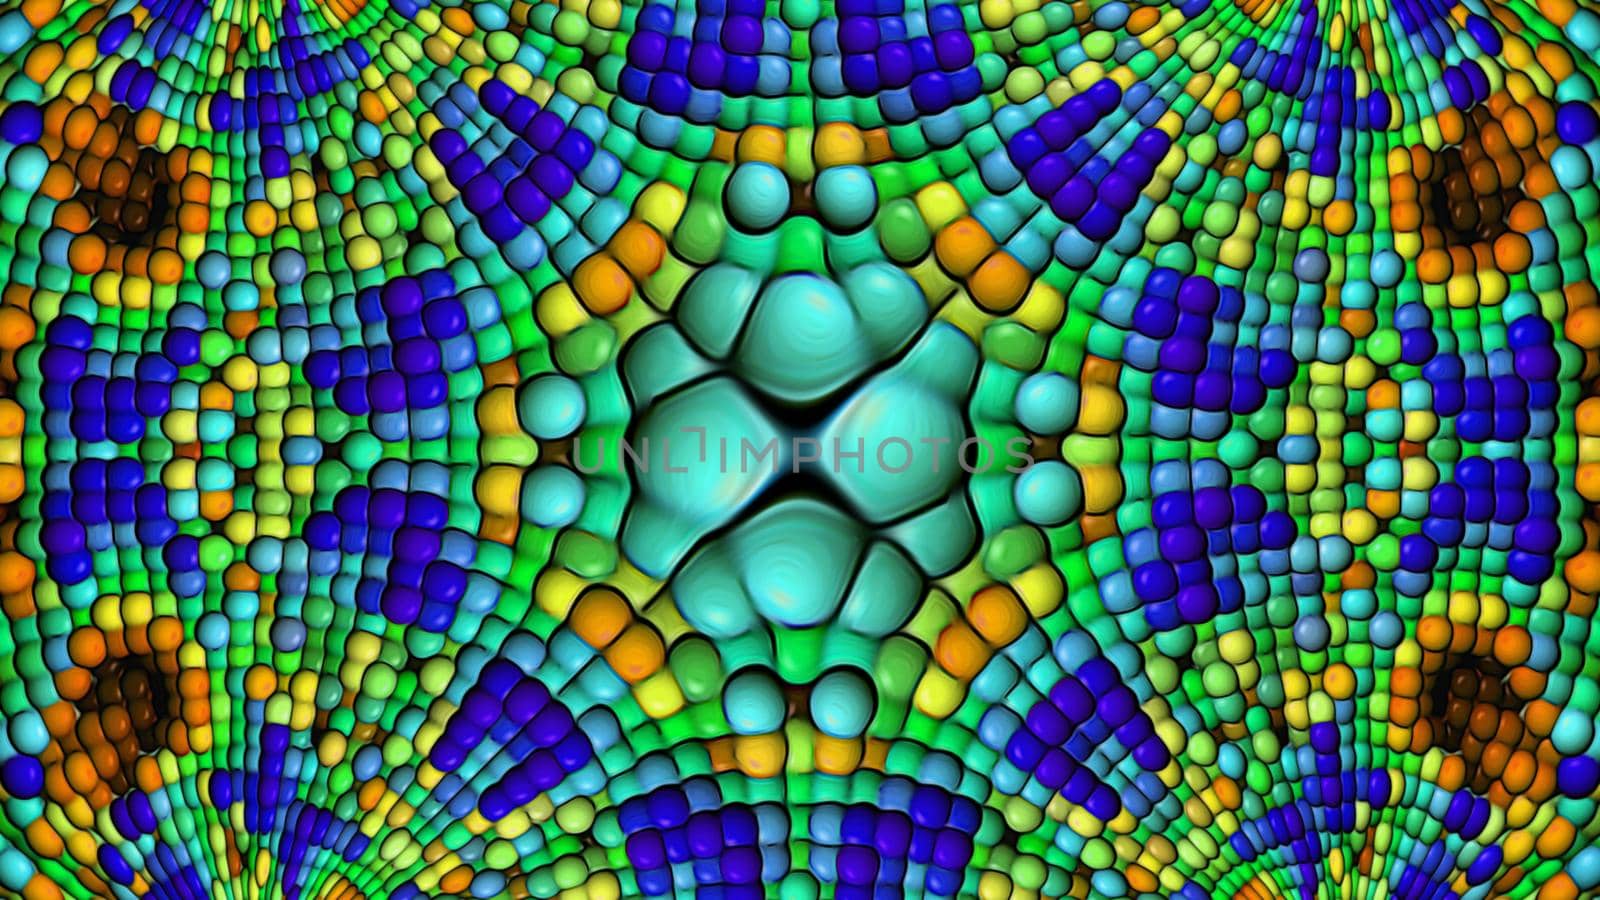 Abstract multi-colored background with a surface of spheres. 3d image